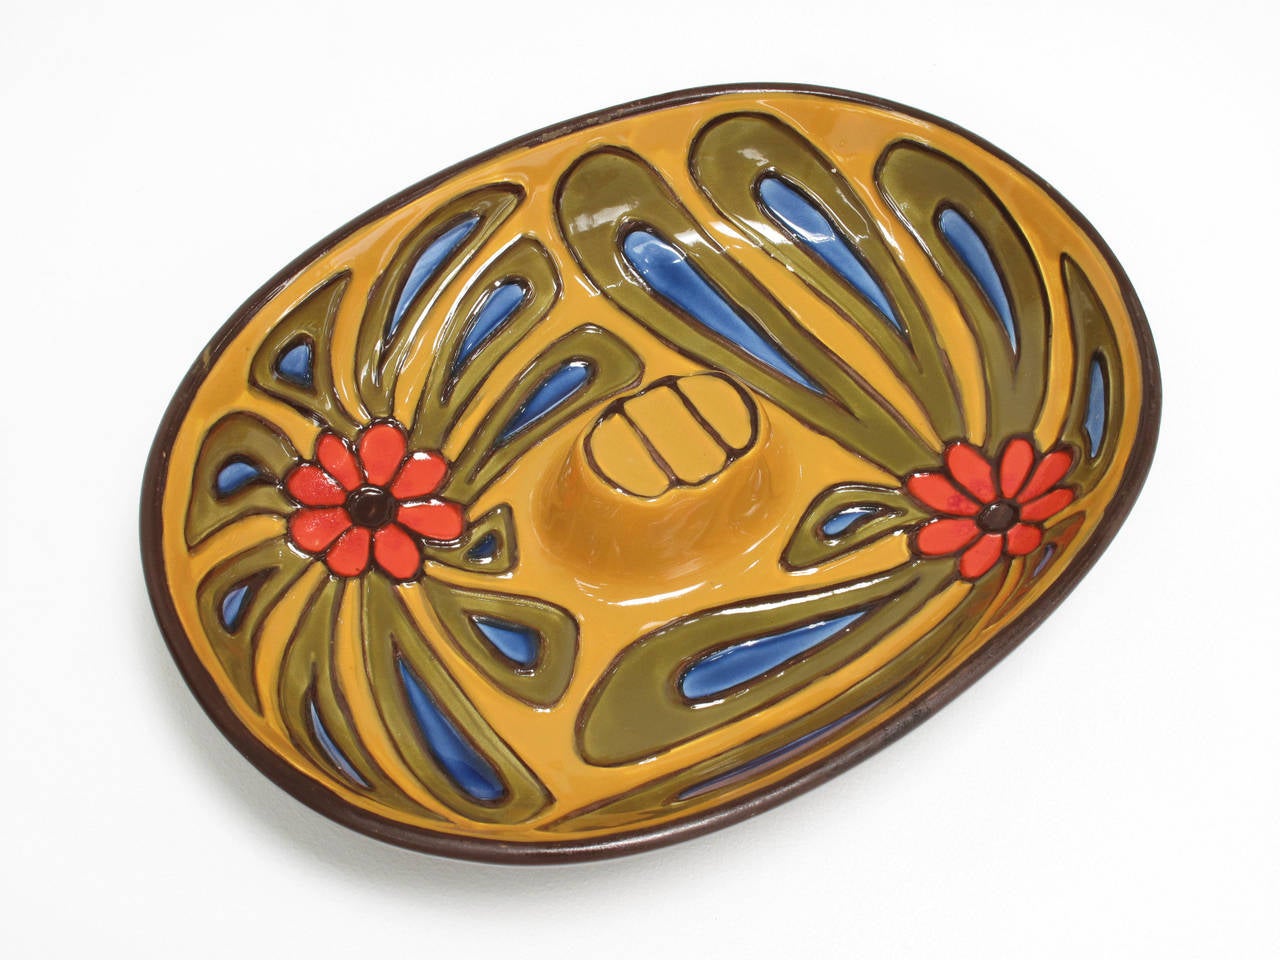 Colorful hand decorated, glazed ceramic dish, part of the contemporary collection designed exclusively for Haeger by Ben Seibel, celebrating "the look of today with youth appeal." An exclusive import, marked on bottom "Haeger,"